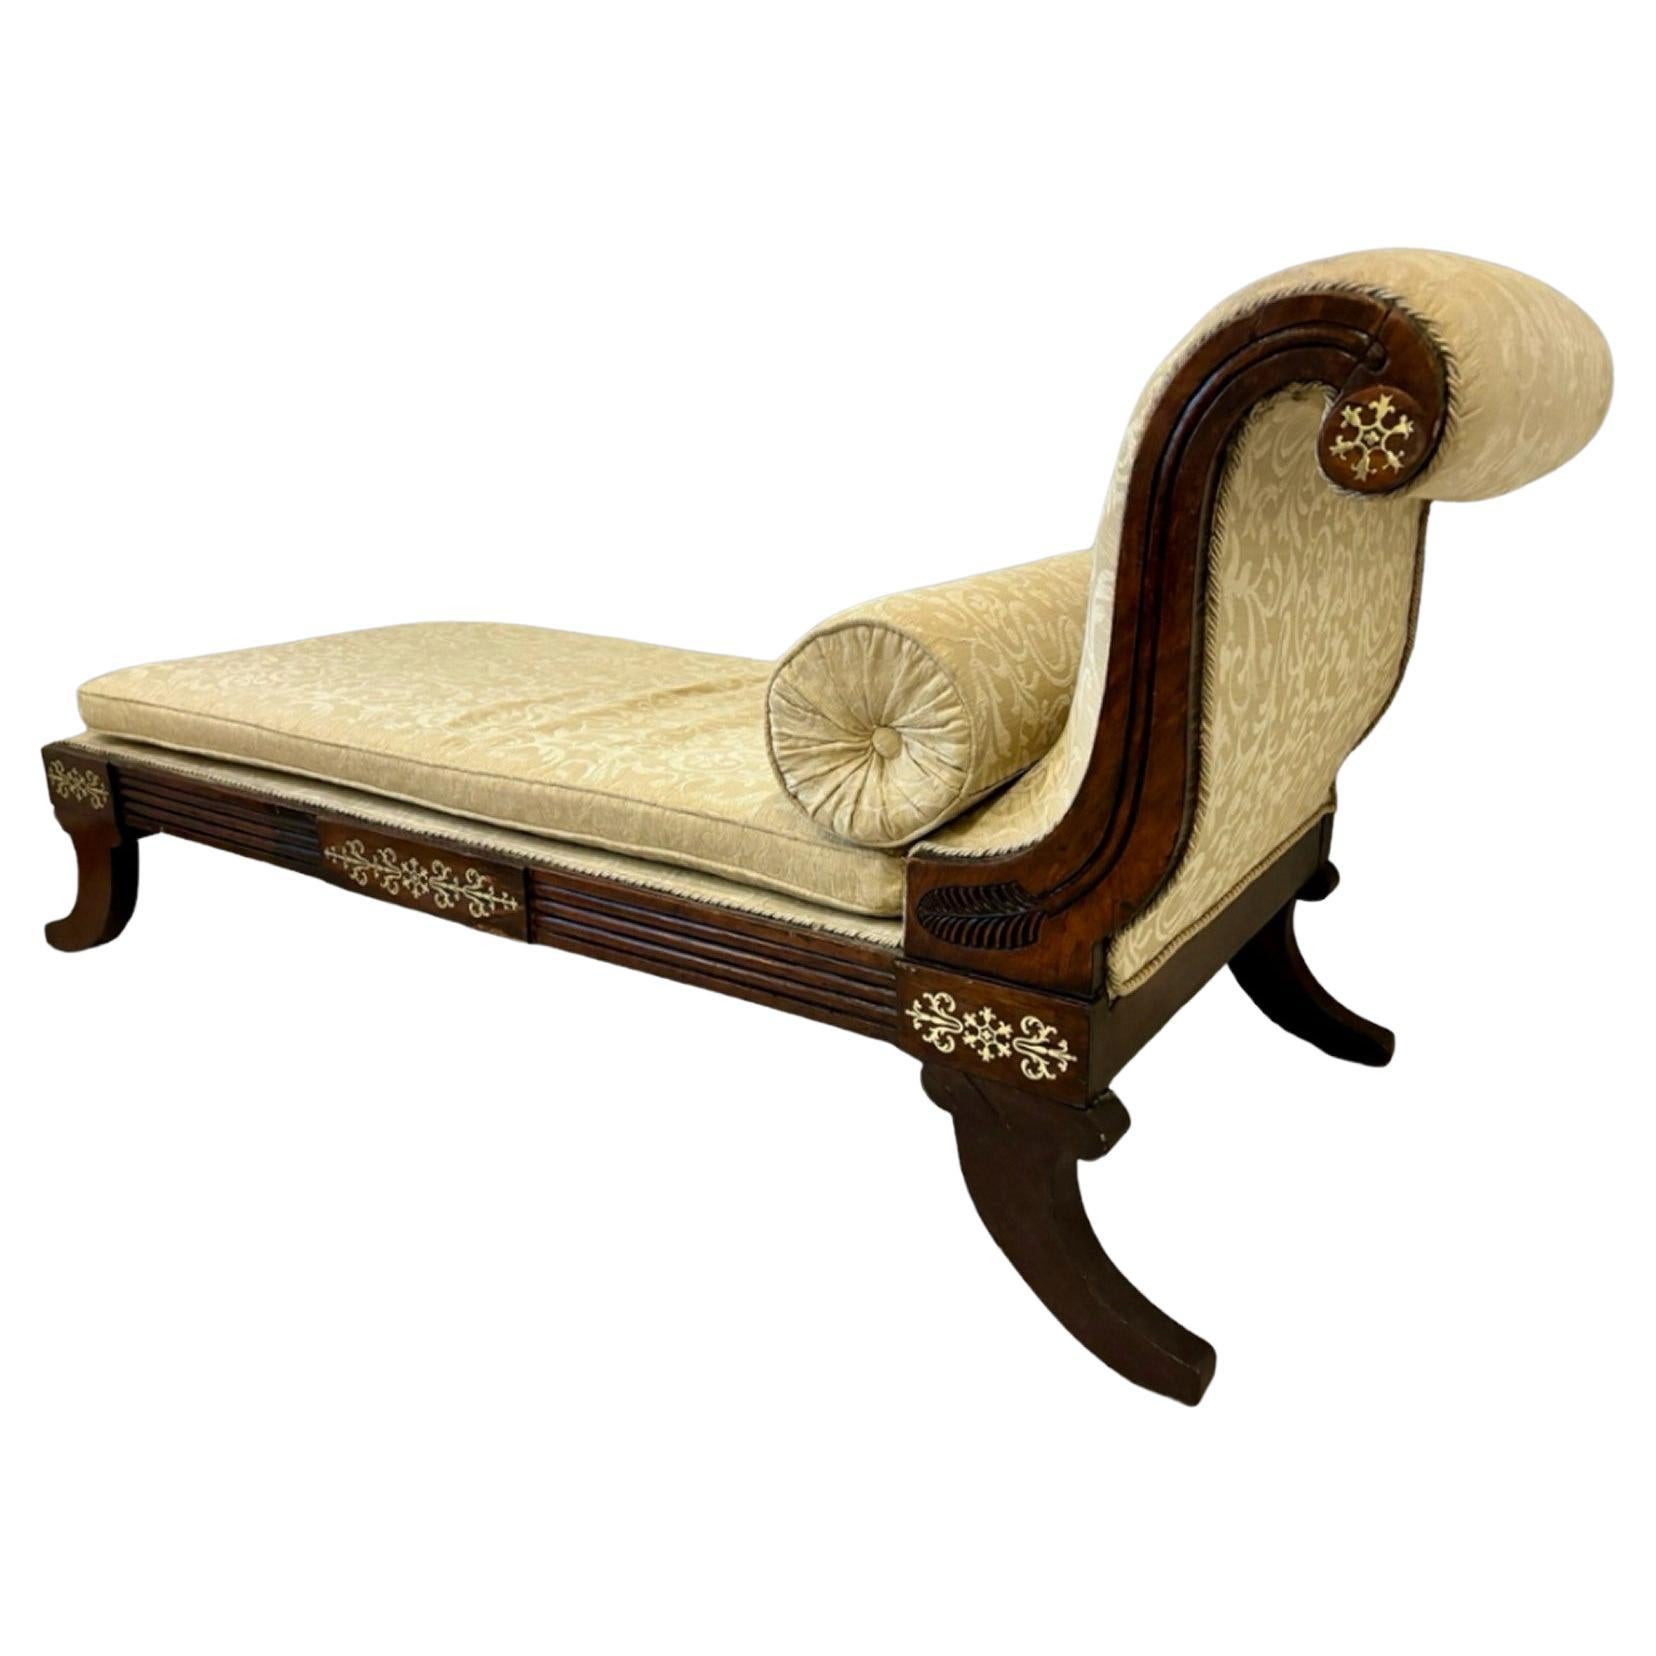 A Lovely Georgian Regency Daybed/Chaise Longue For Sale